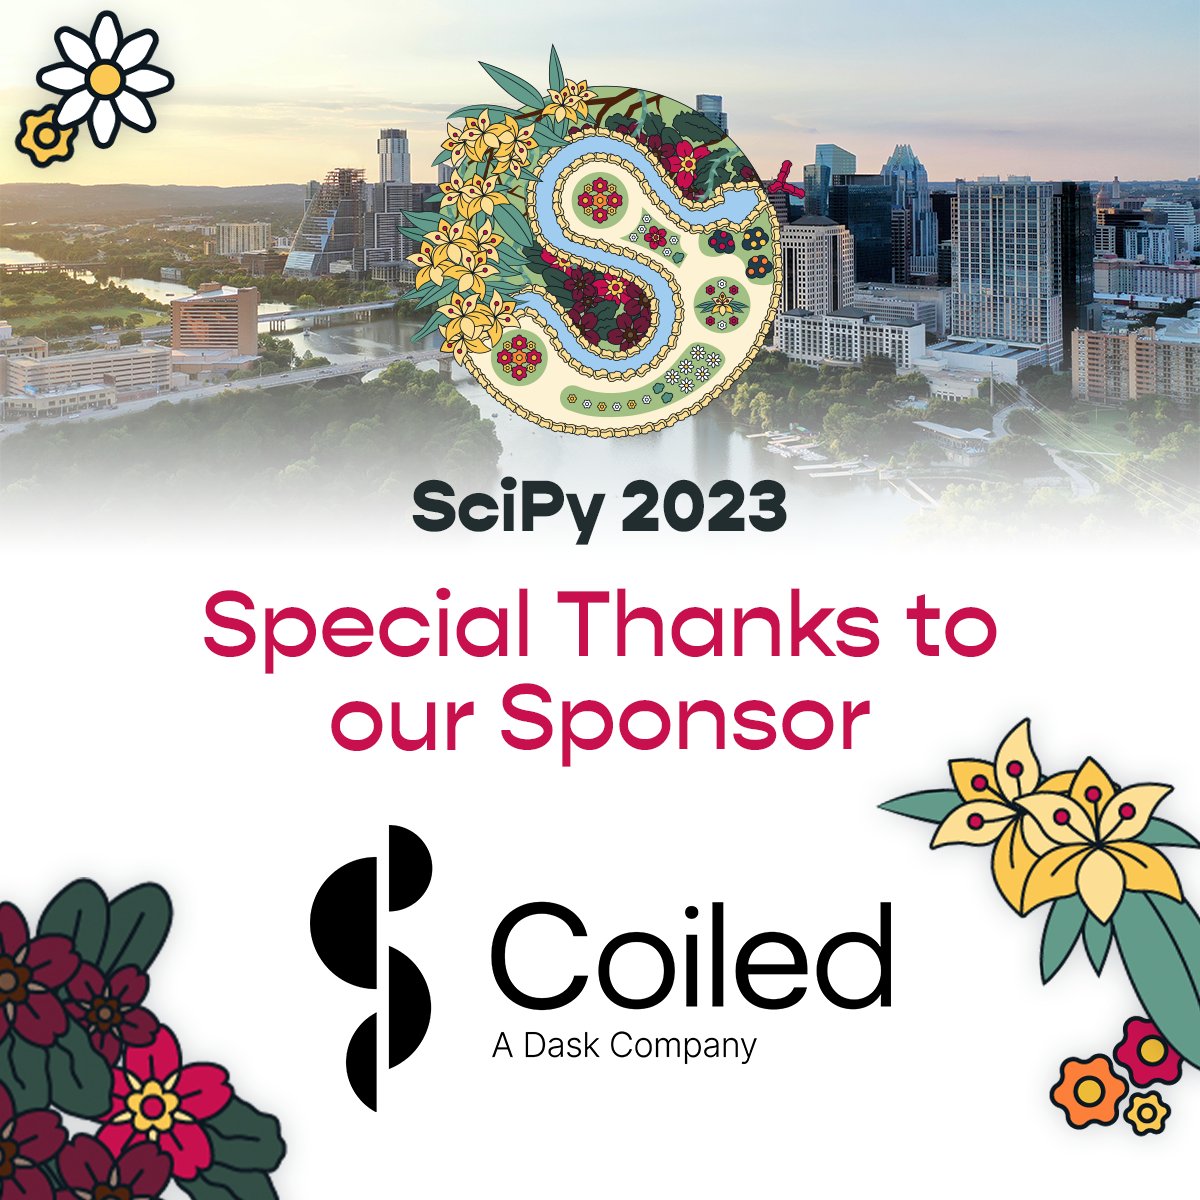 Thank you to @CoiledHQ for the gold sponsorship of #SciPy2023! Your support helps bring together a community of #datascientists and #developers advancing scientific computing with #Python 💙🐍 Buy your tickets now to join us July 10-16 in sunny #ATX 😎🌞 scipy2023.scipy.org/tickets